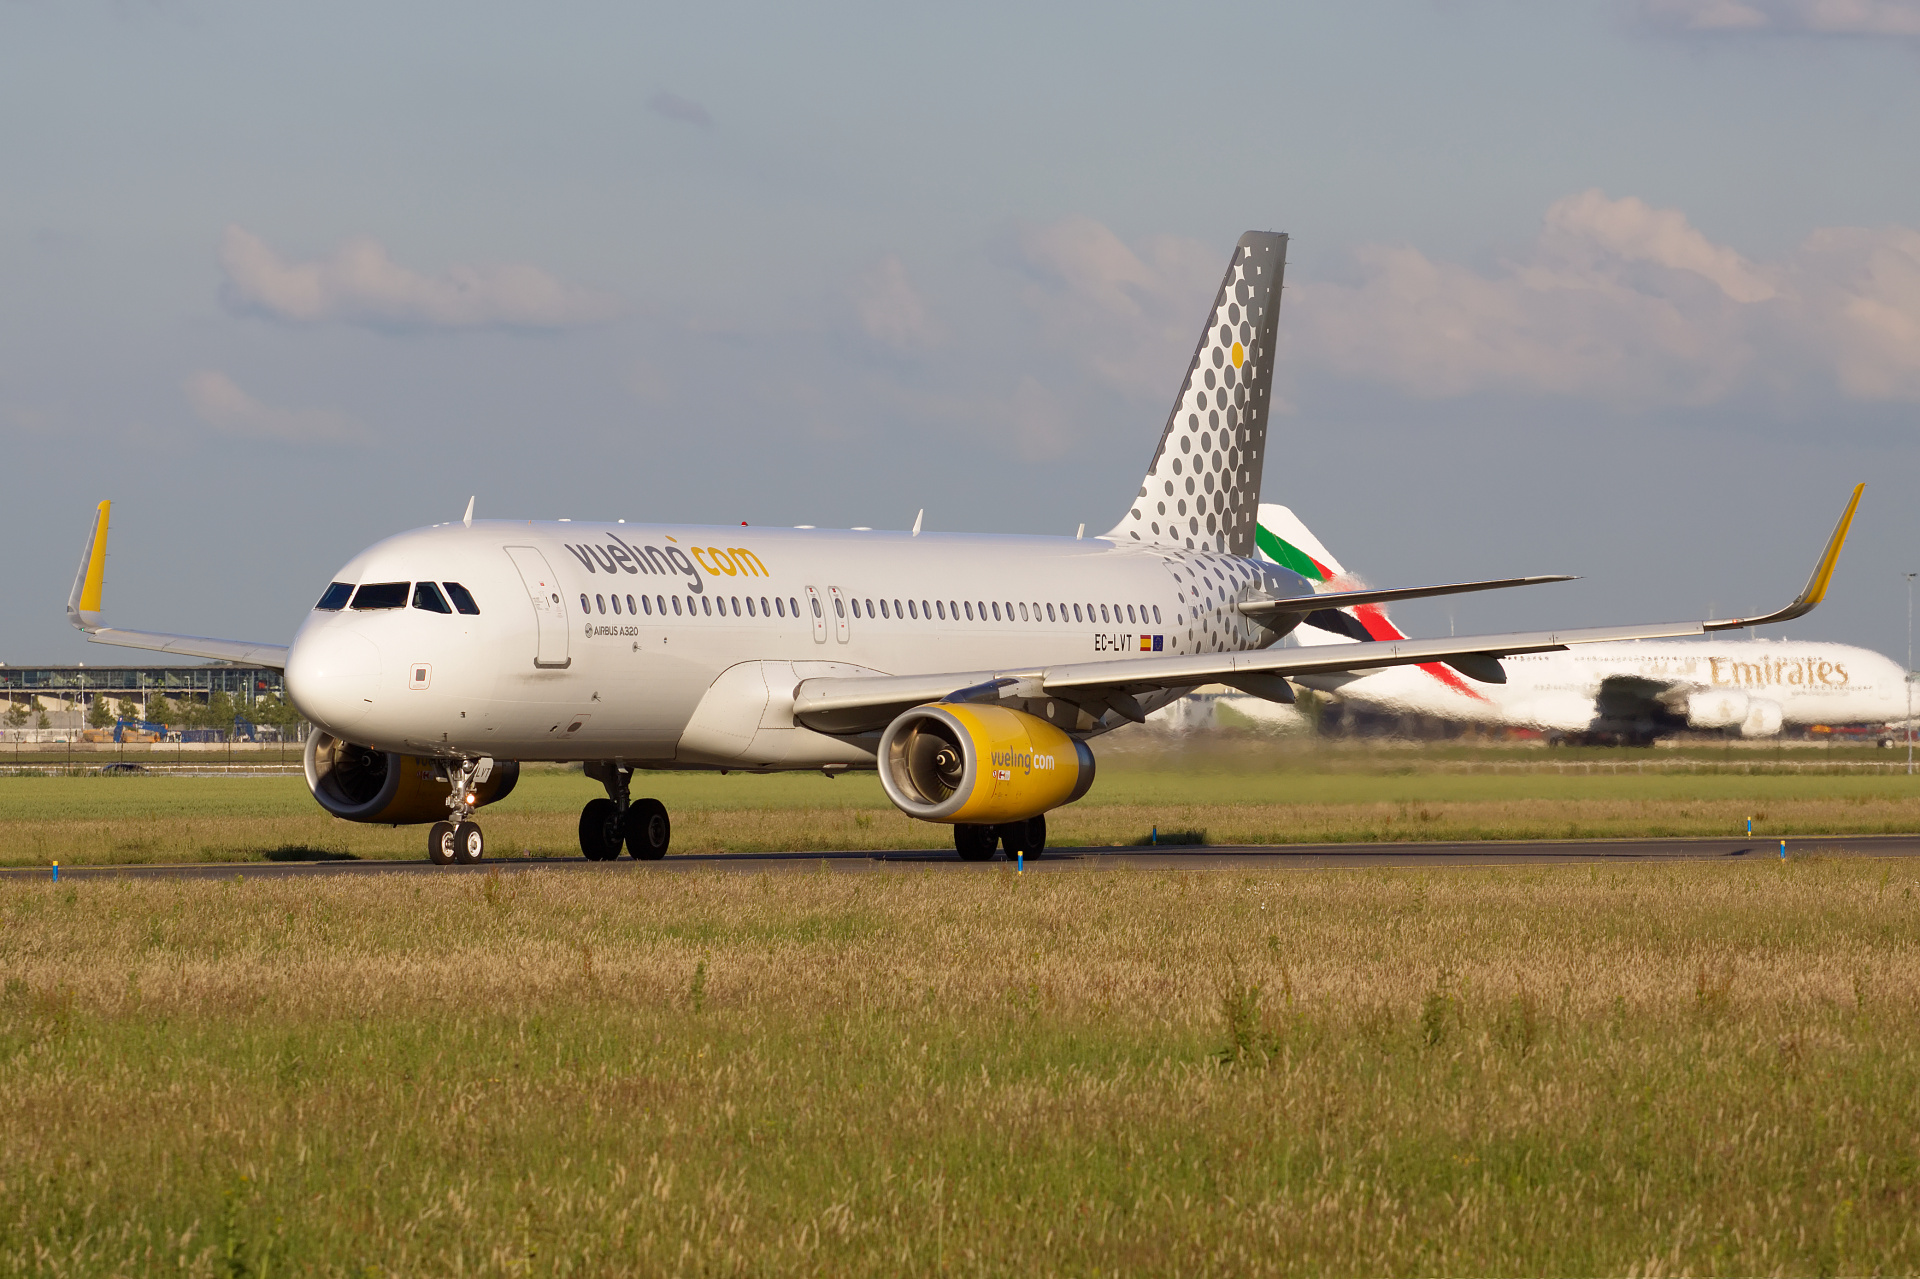 EC-LVT (Aircraft » Schiphol Spotting » Airbus A320-200 » Vueling Airlines)